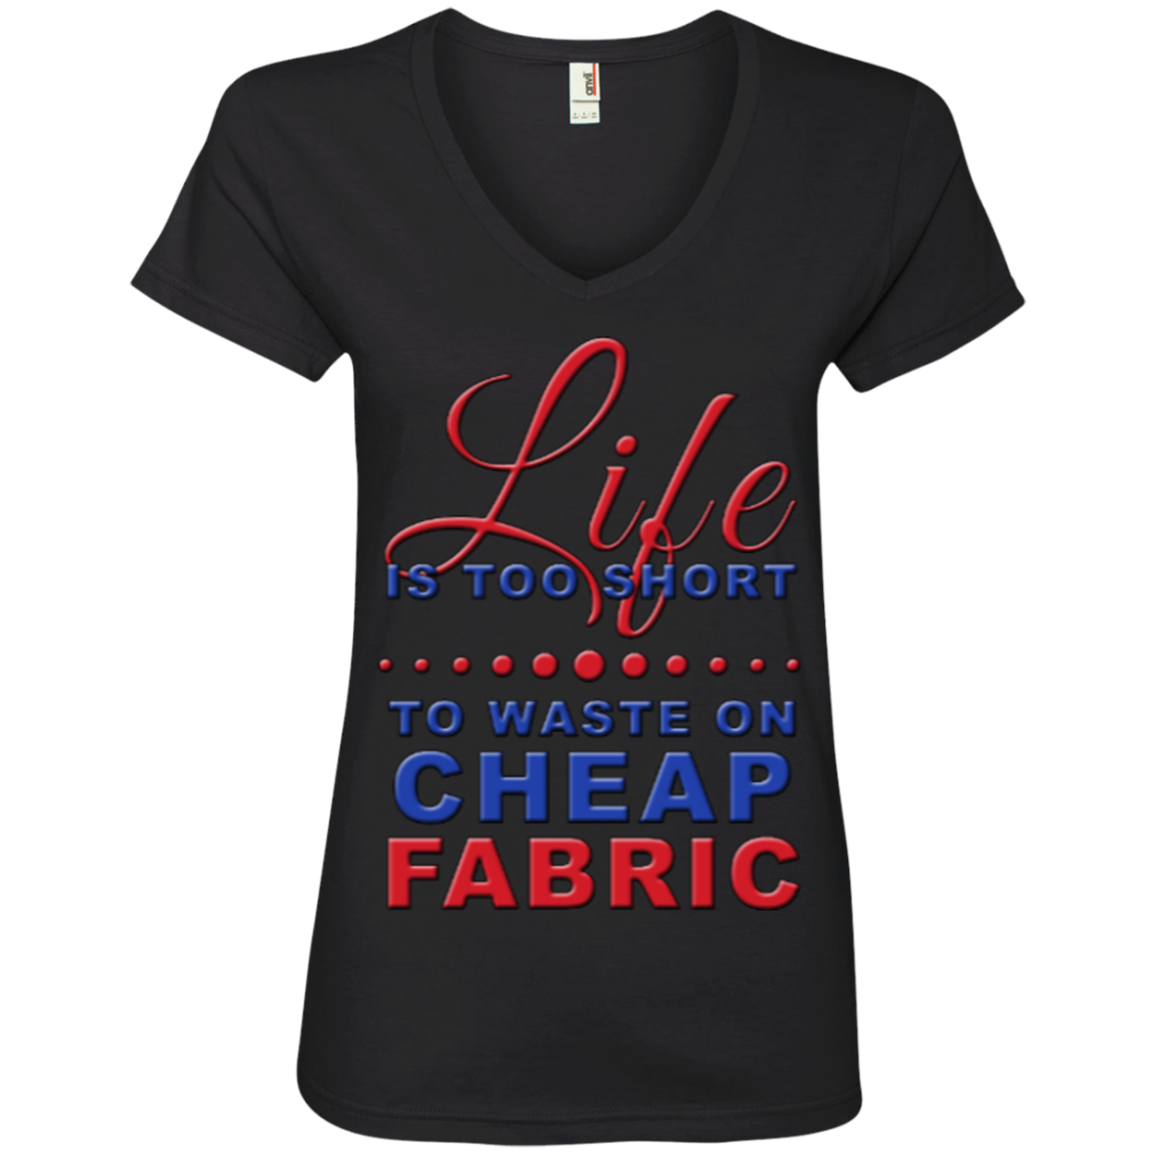 Life Is Too Short to Use Cheap Fabric Ladies V-Neck Tee - Crafter4Life - 3